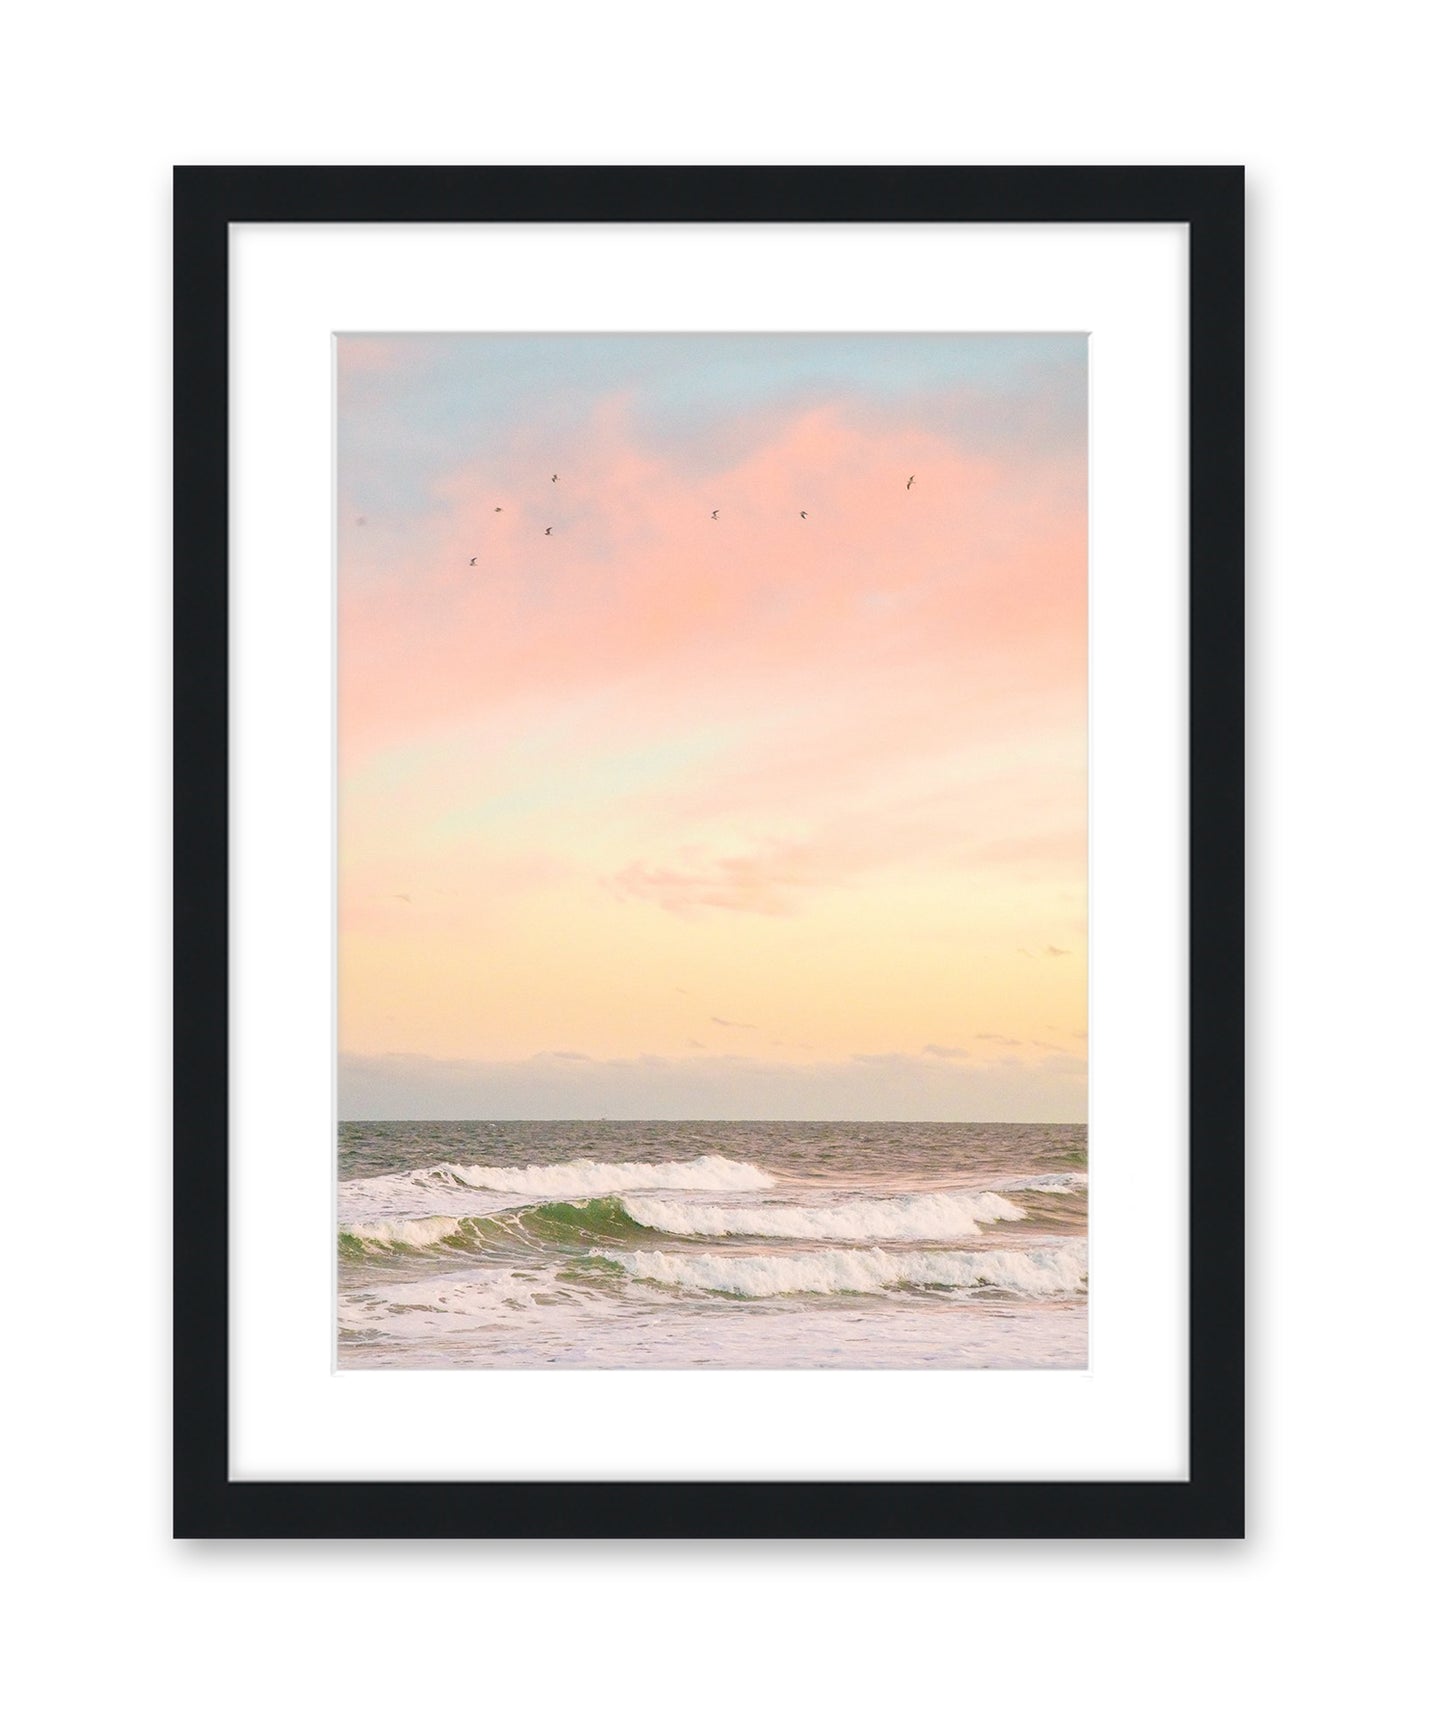 Pastel Warm Sunset Wrightsville Beach Photograph, Black Frame by Wright and Roam